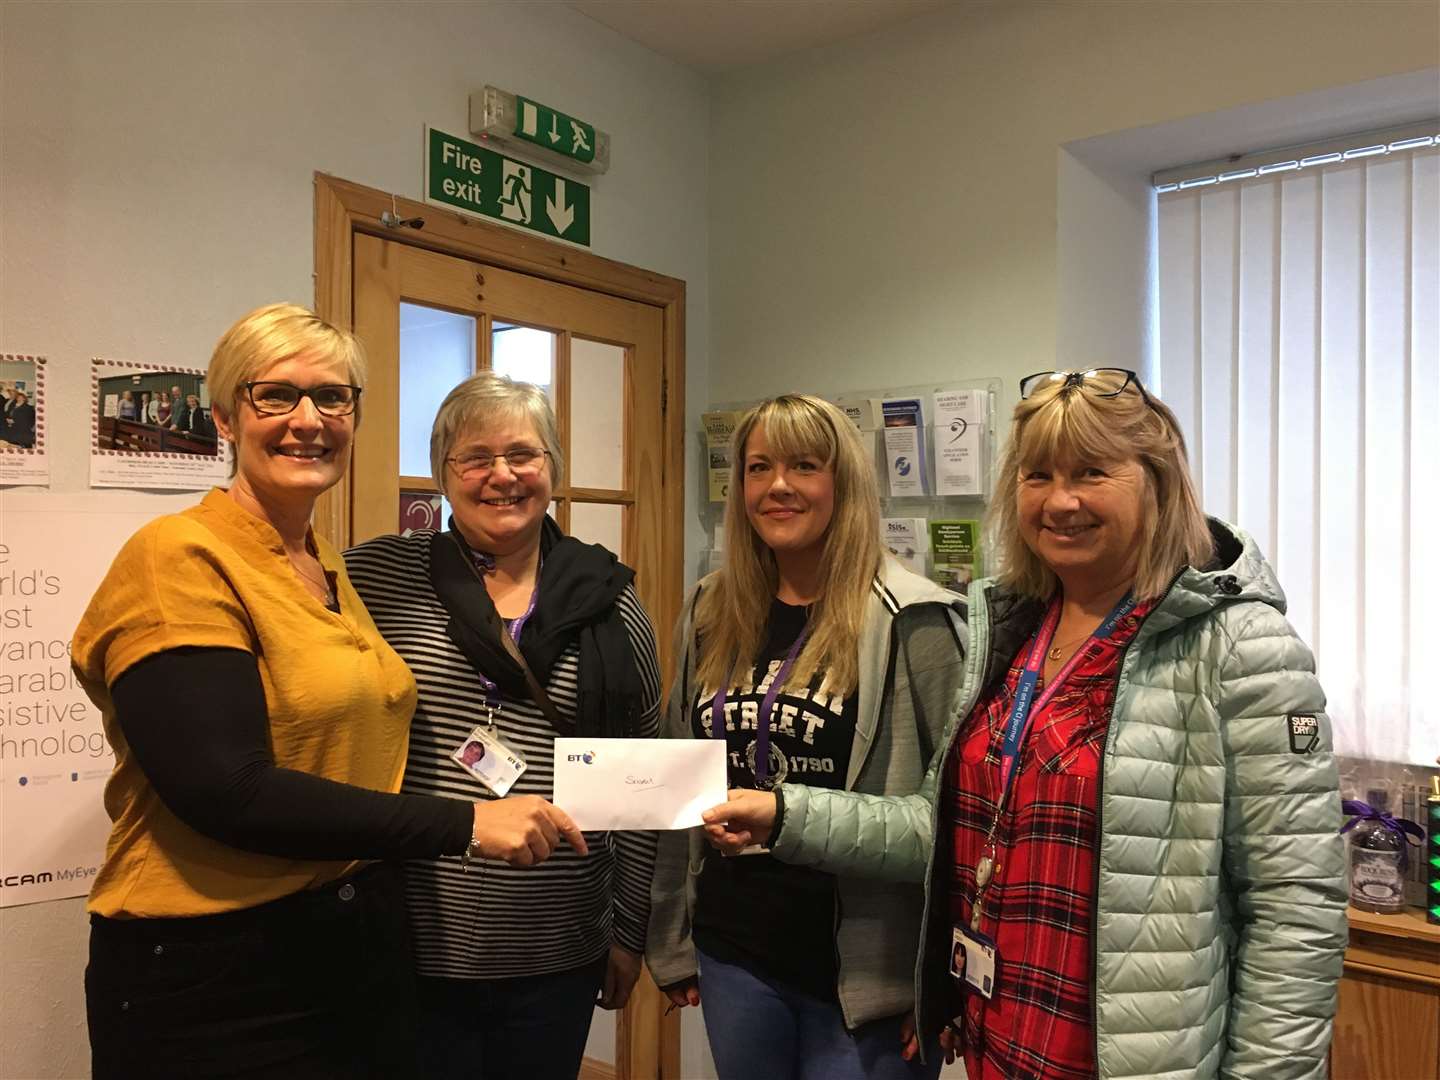 Hearing and Sight Care manager Deirdre Aitken (left) receives a cheque from BT staff representatives (from second left) Susan McDonald, Karon Jappy and Hannah Perriewood.